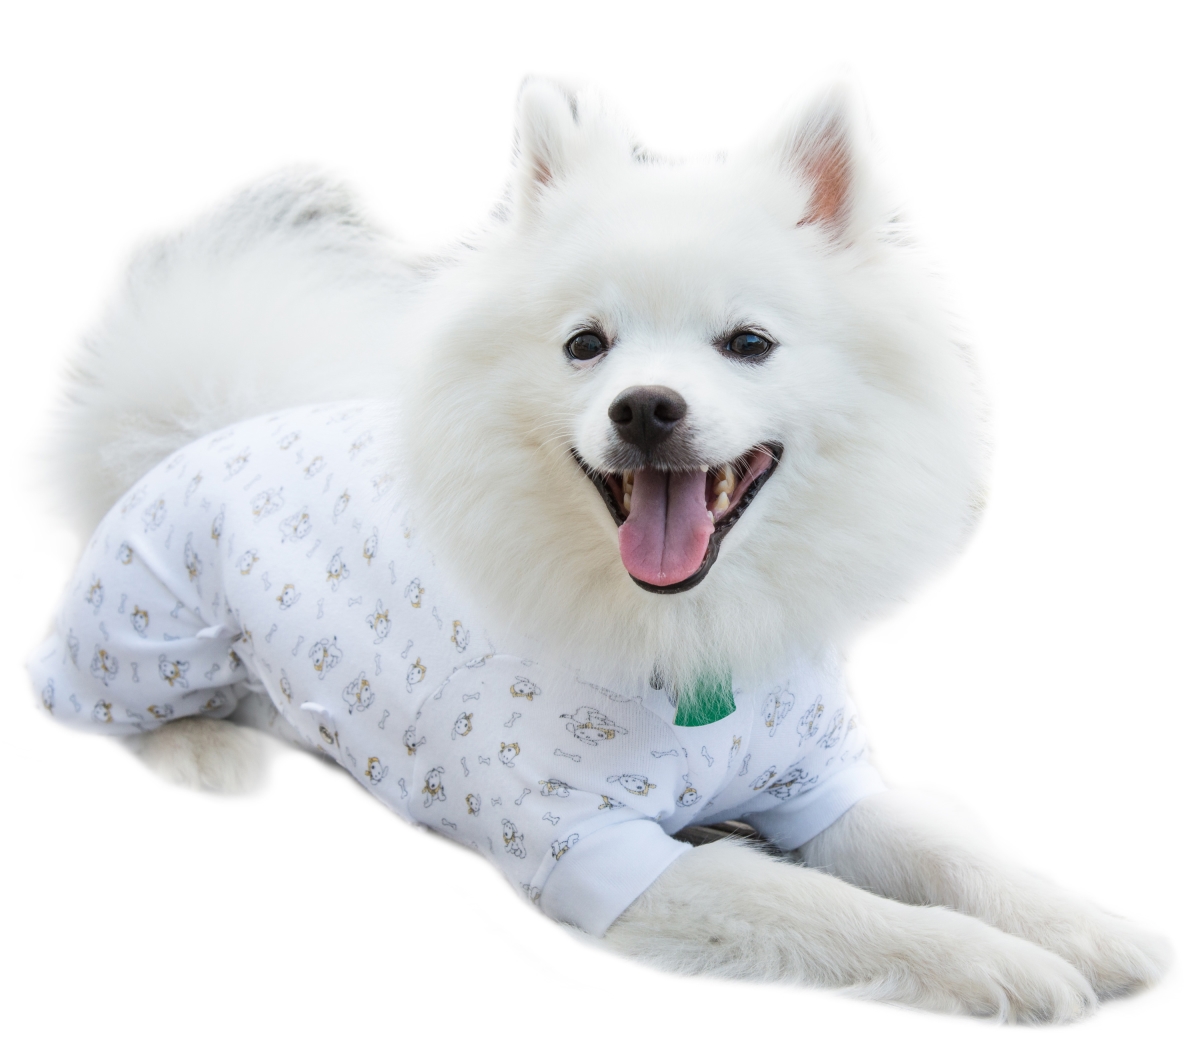 Xxl Adj Fit Pullover Ls Puppy P Adjustable Fit Puppy Print Pullover With Long Sleeve For Pets - 2xl